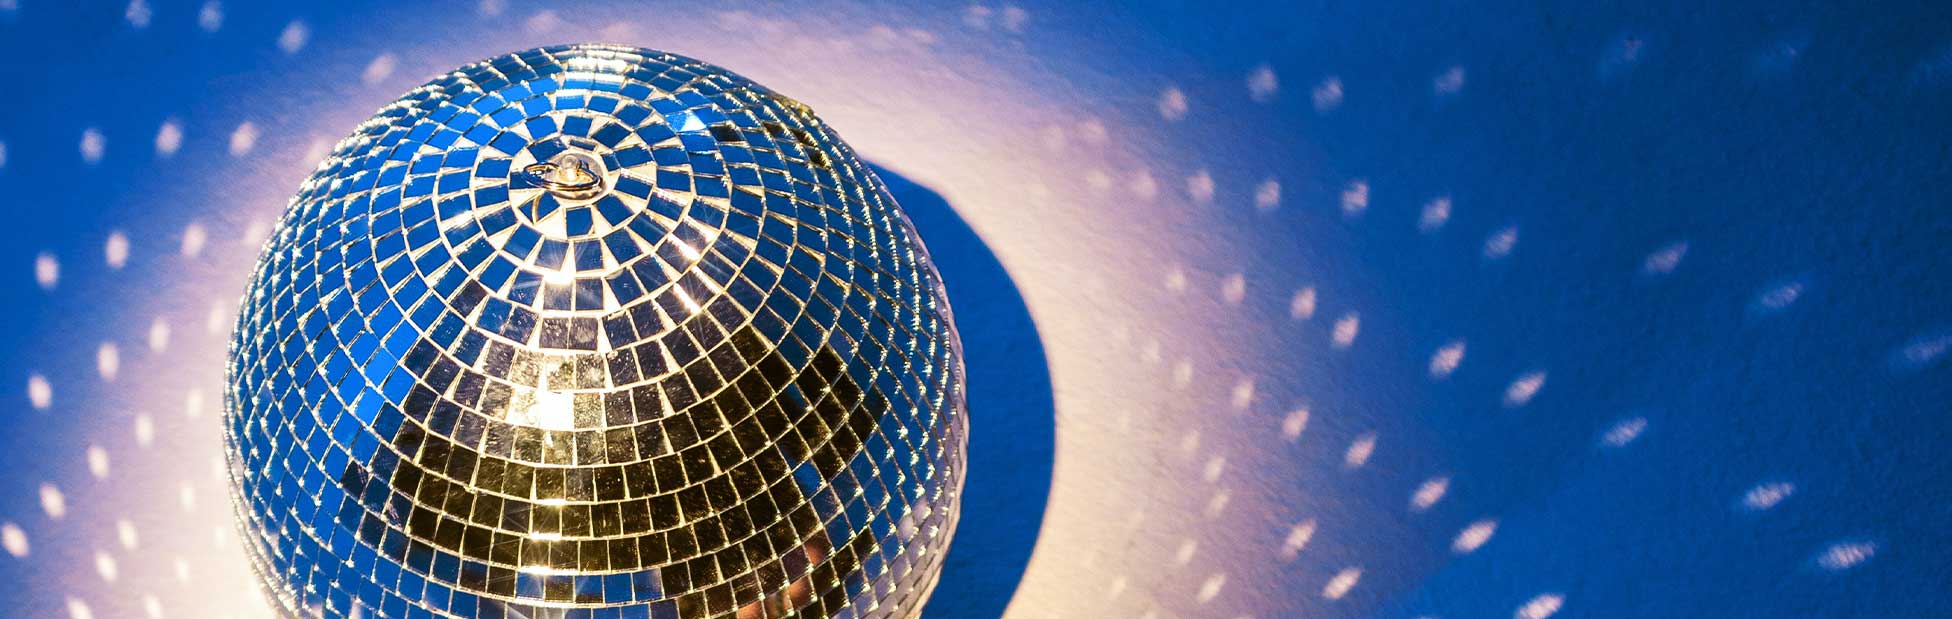 disco ball with coloured lights